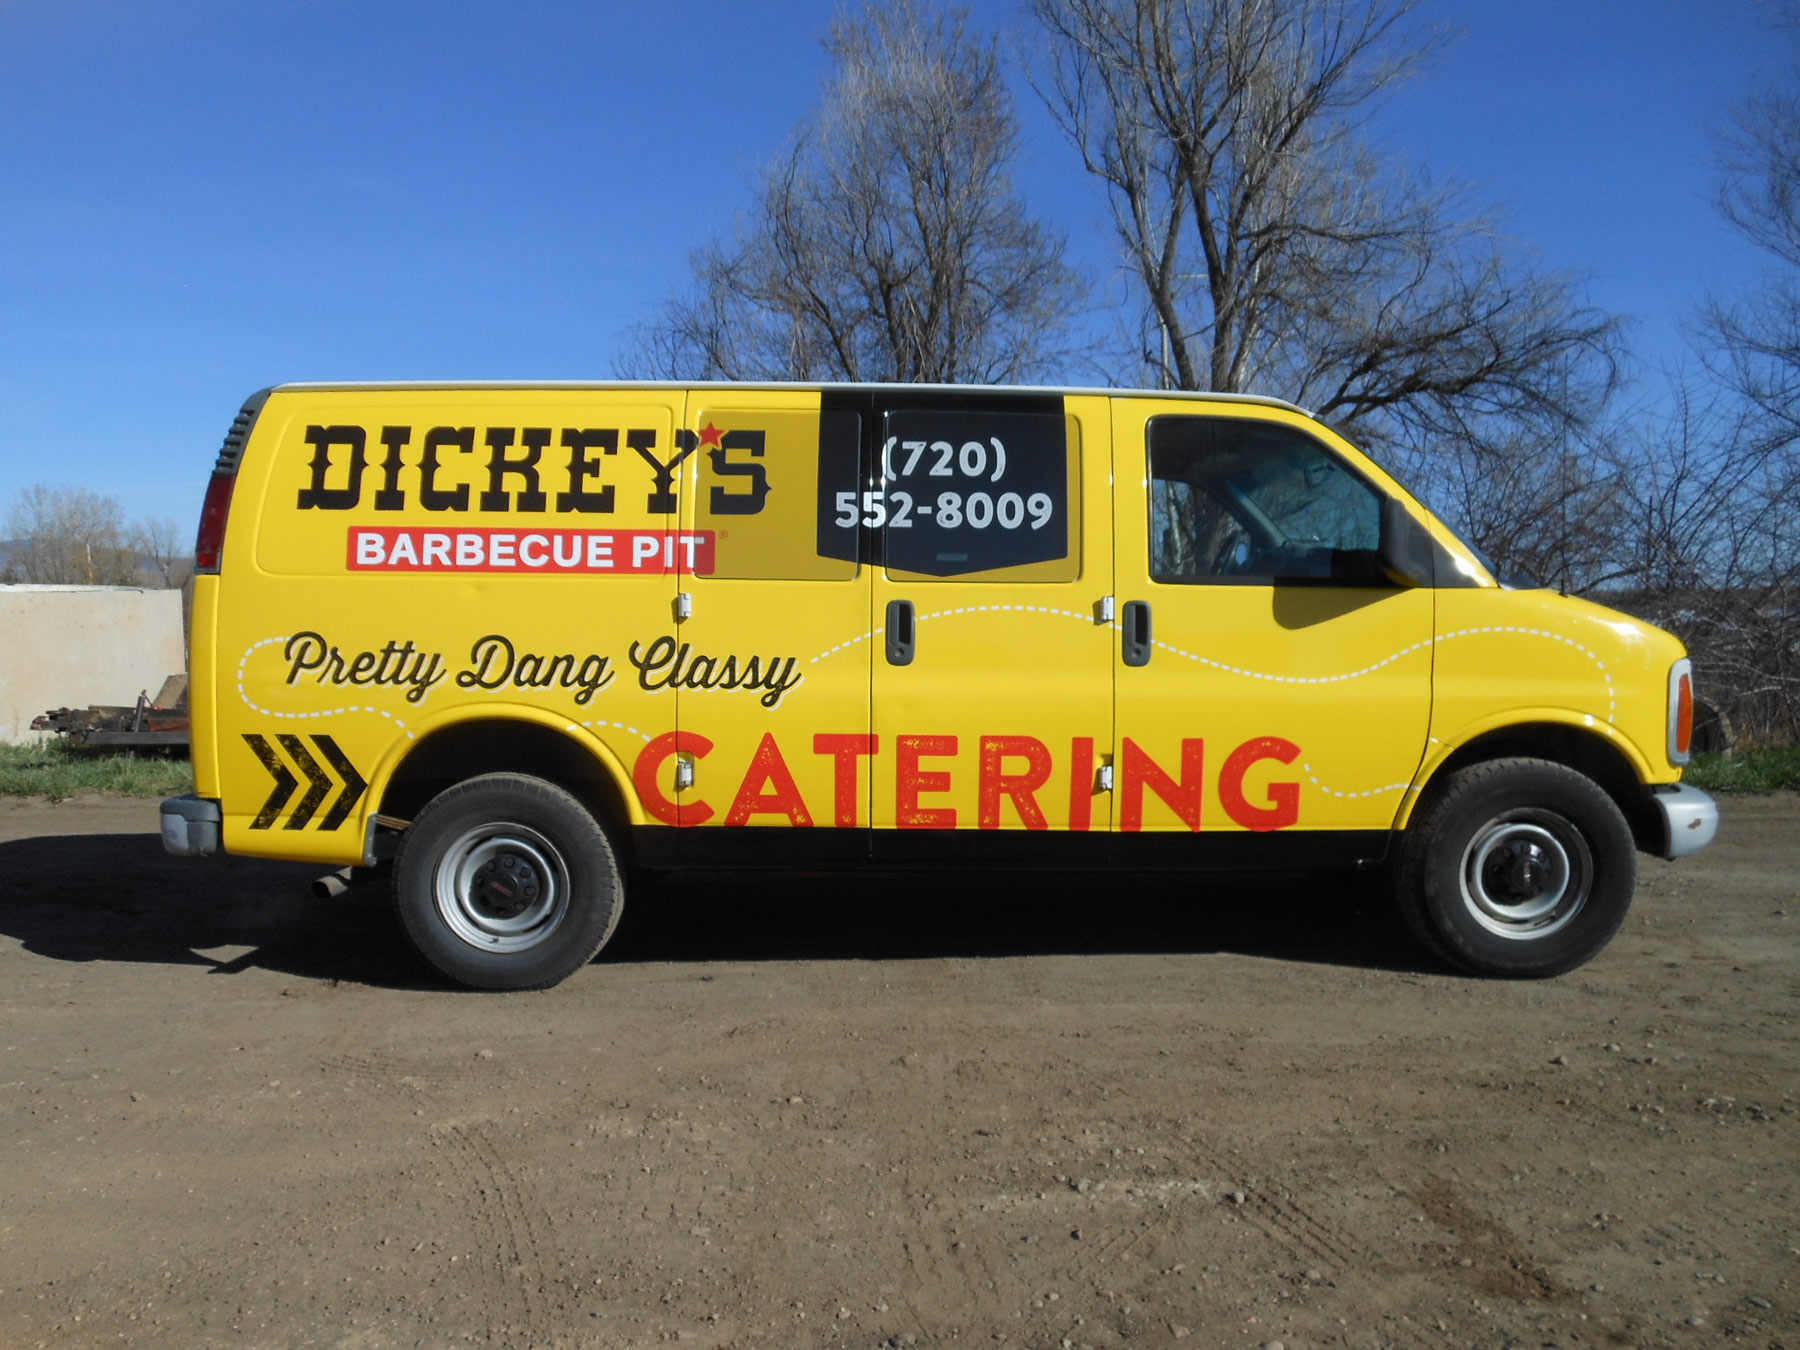 husky signs catering - Jeep Wraps near Loveland